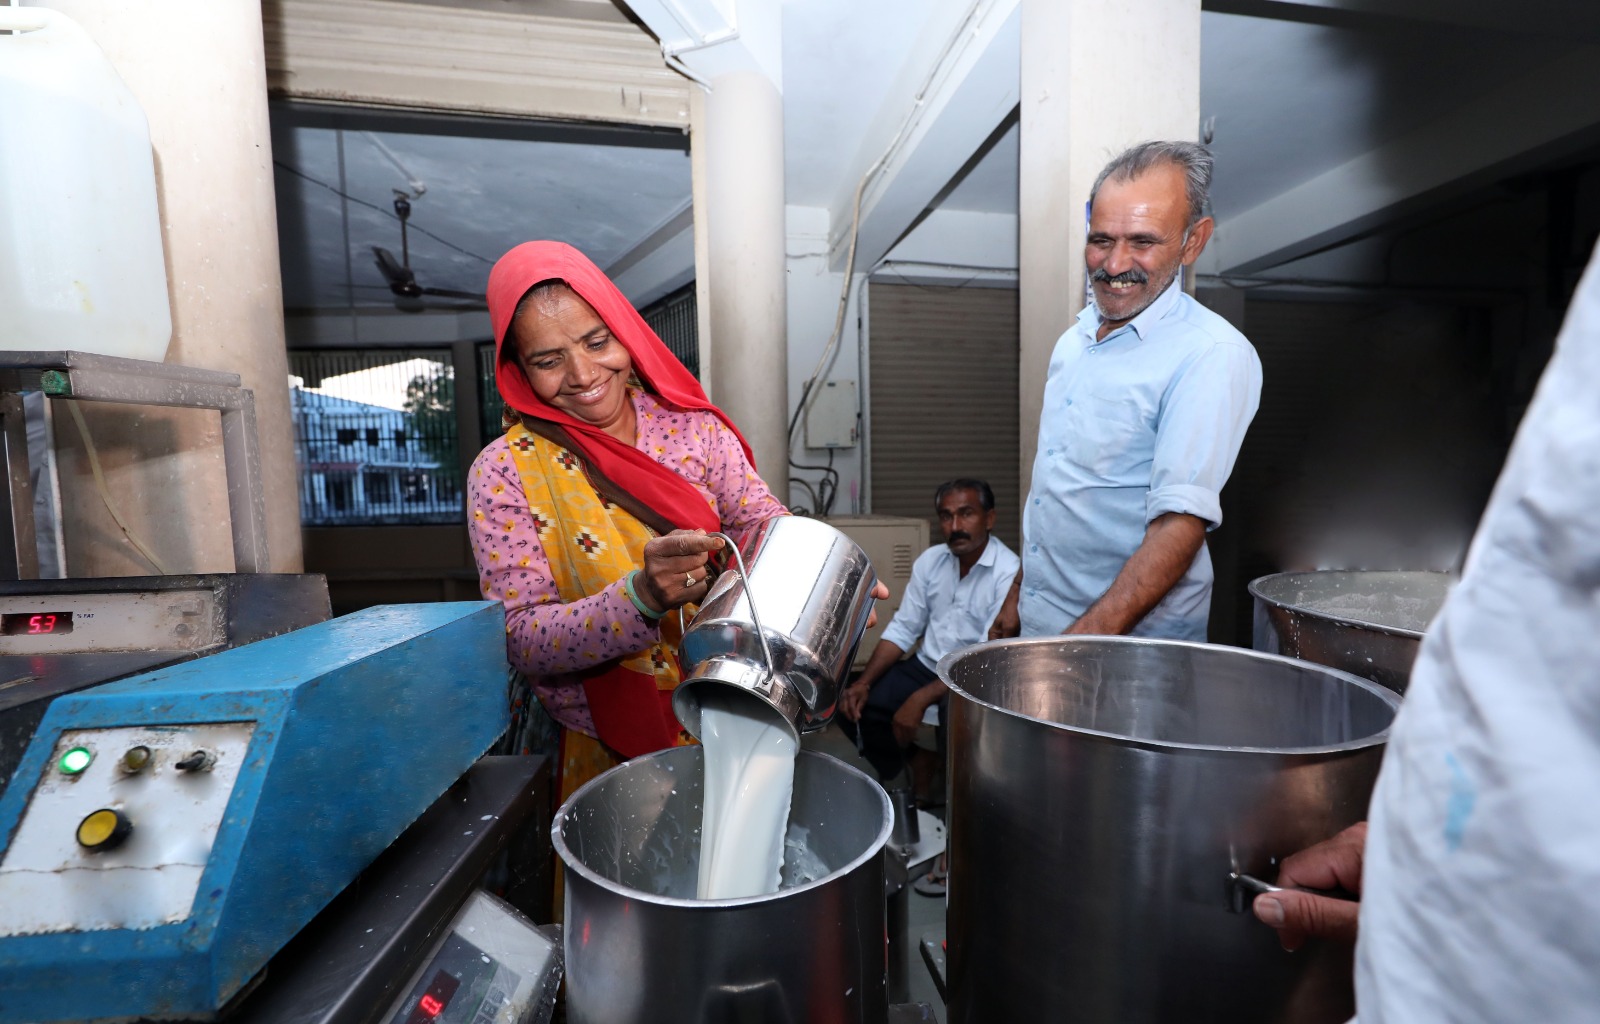 36 lakh milk producers in Gujarat are paid ₹200 crore daily through GCMMF